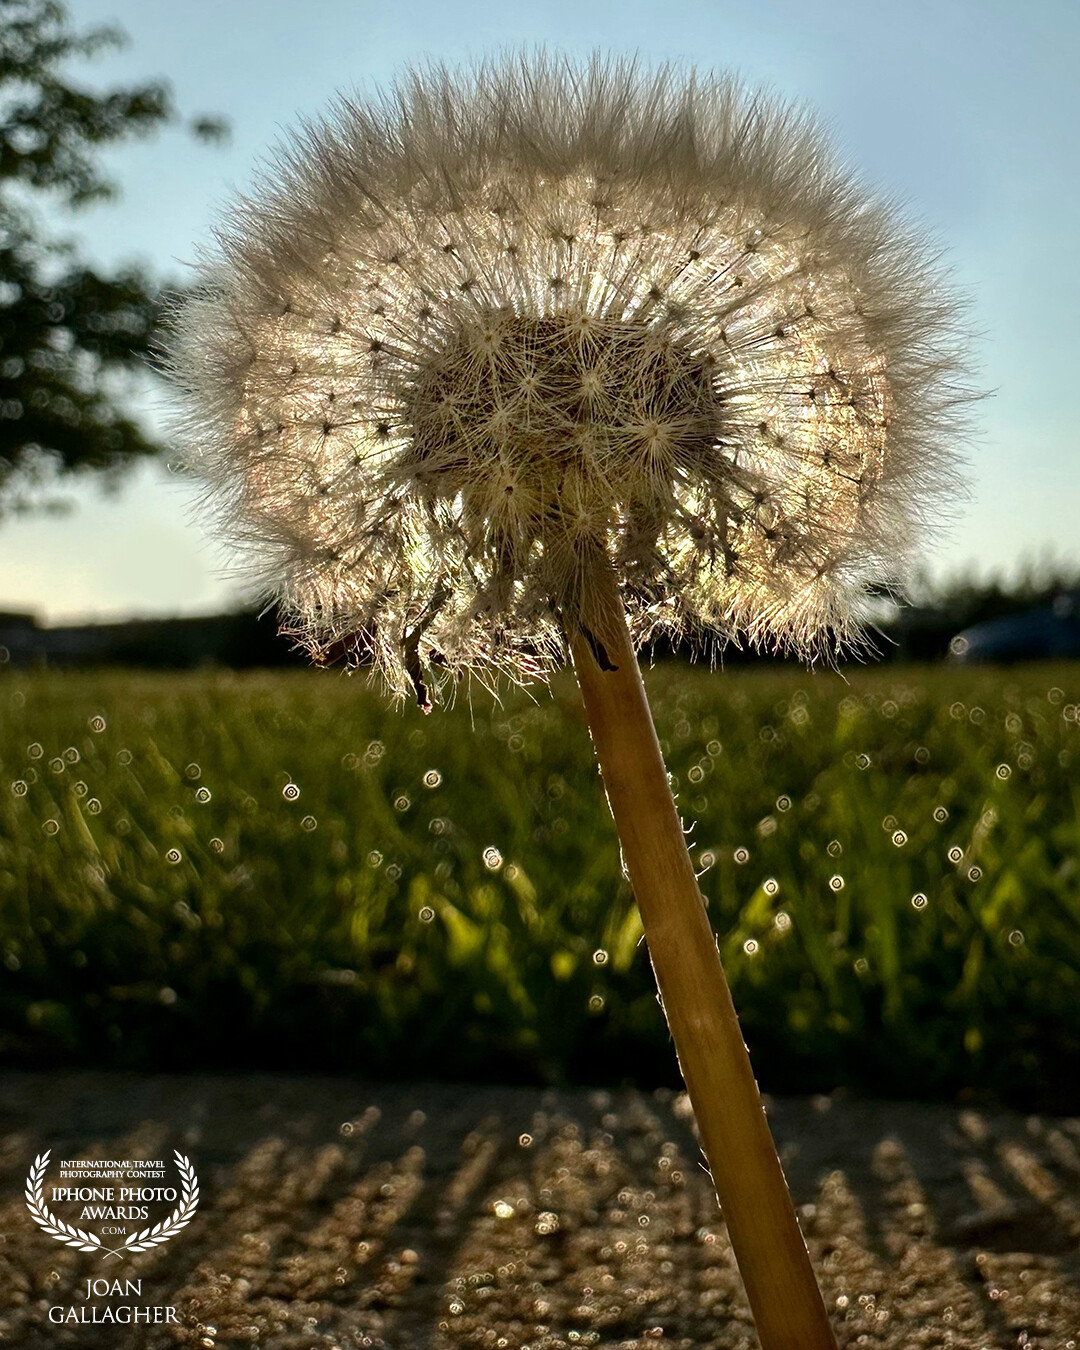 I always marvel at the delicate nature of dandelions. It seems I can’t get enough. I will pull over for one that is gracefully putting itself into the sunlight to show its beauty.